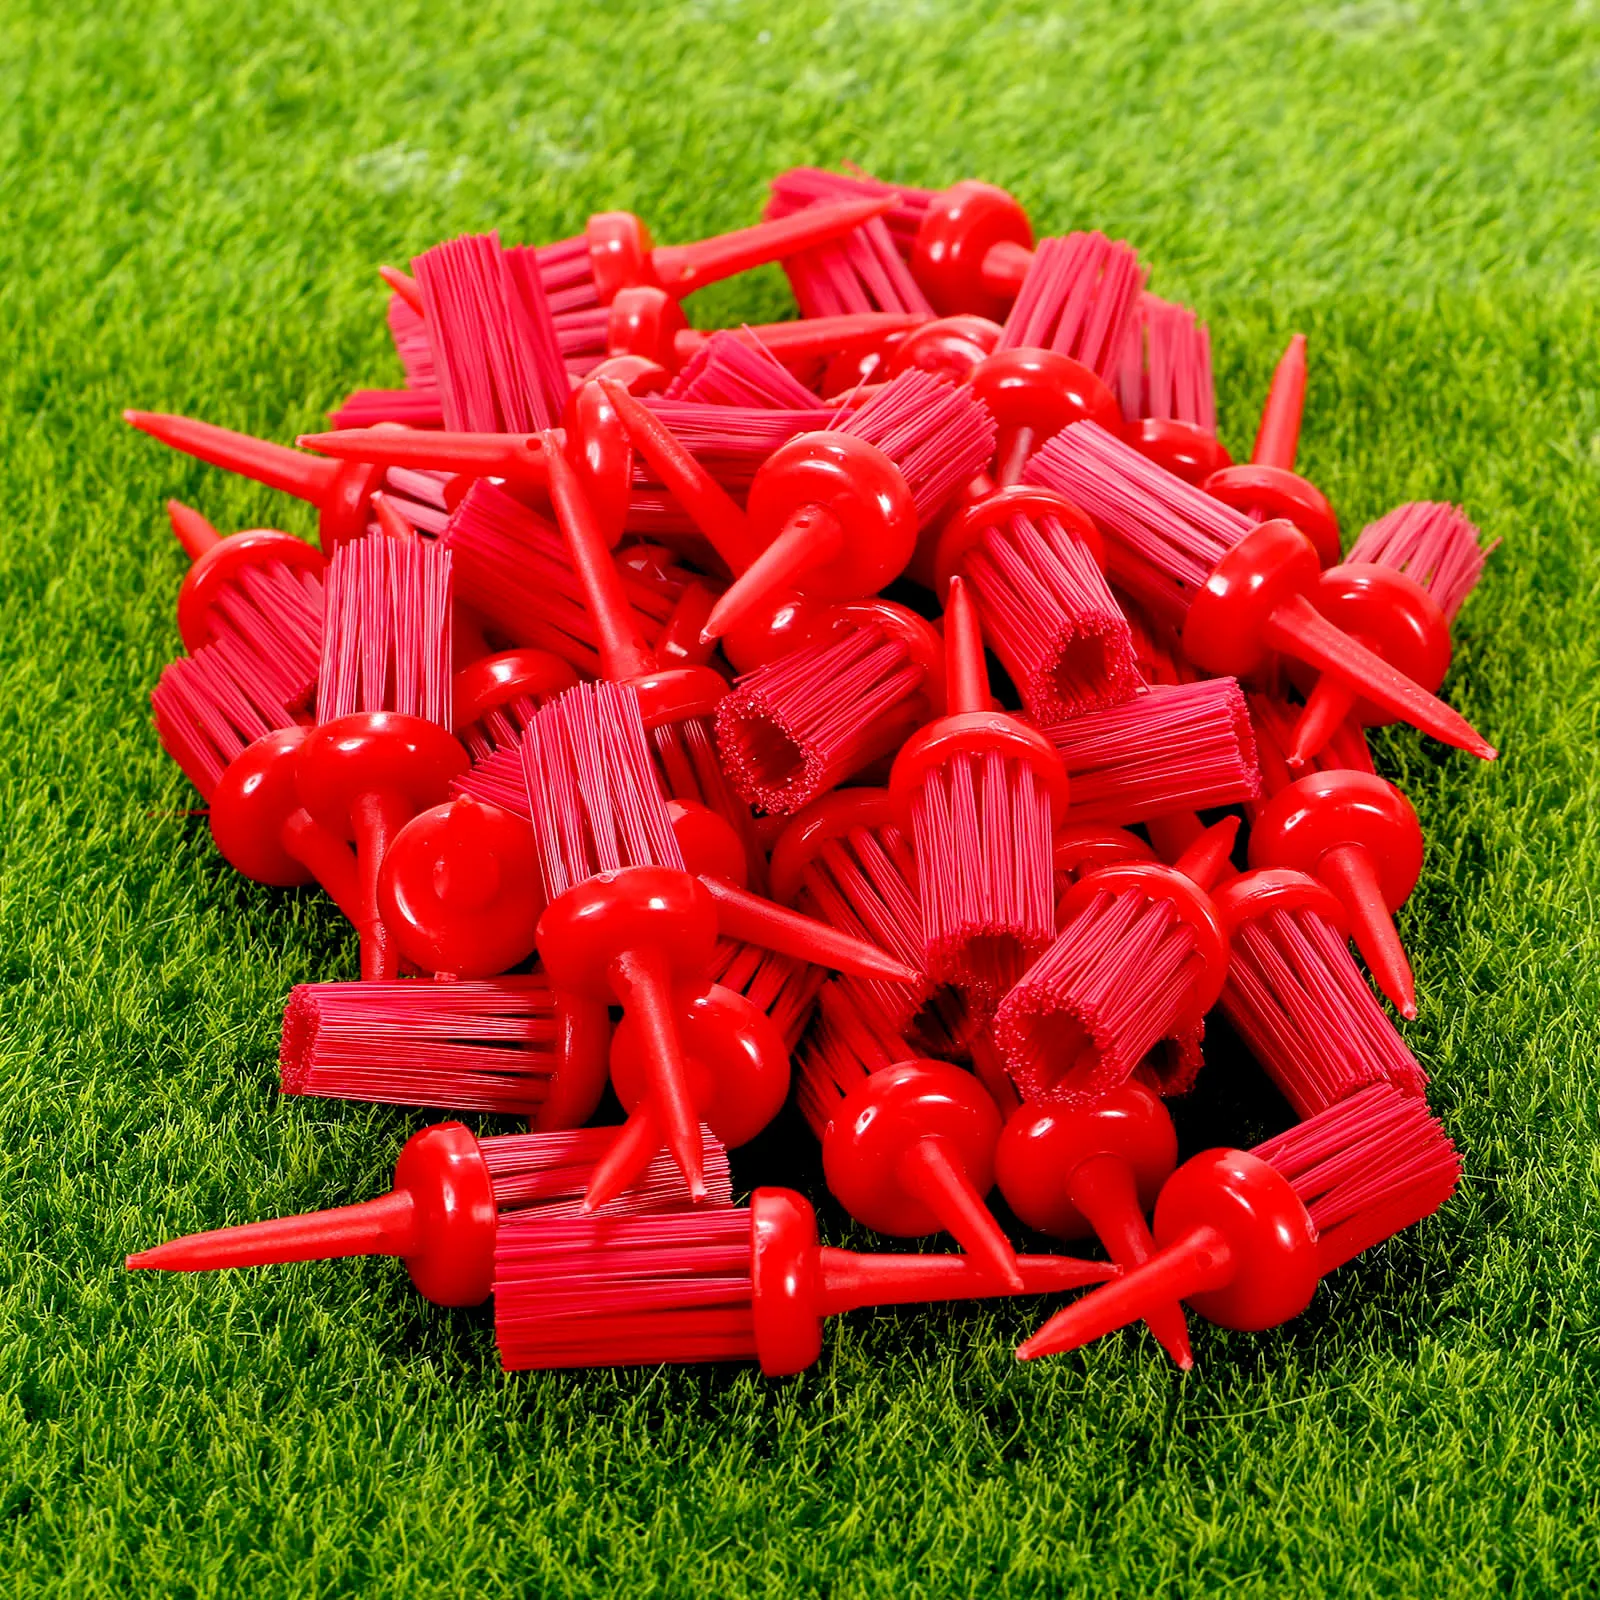 gohantee Plastic 1 Pack 50pcs 62mm Golf Tees Brush Driver Training Accessories Tool Ball Holder Tee Mixed Colors |